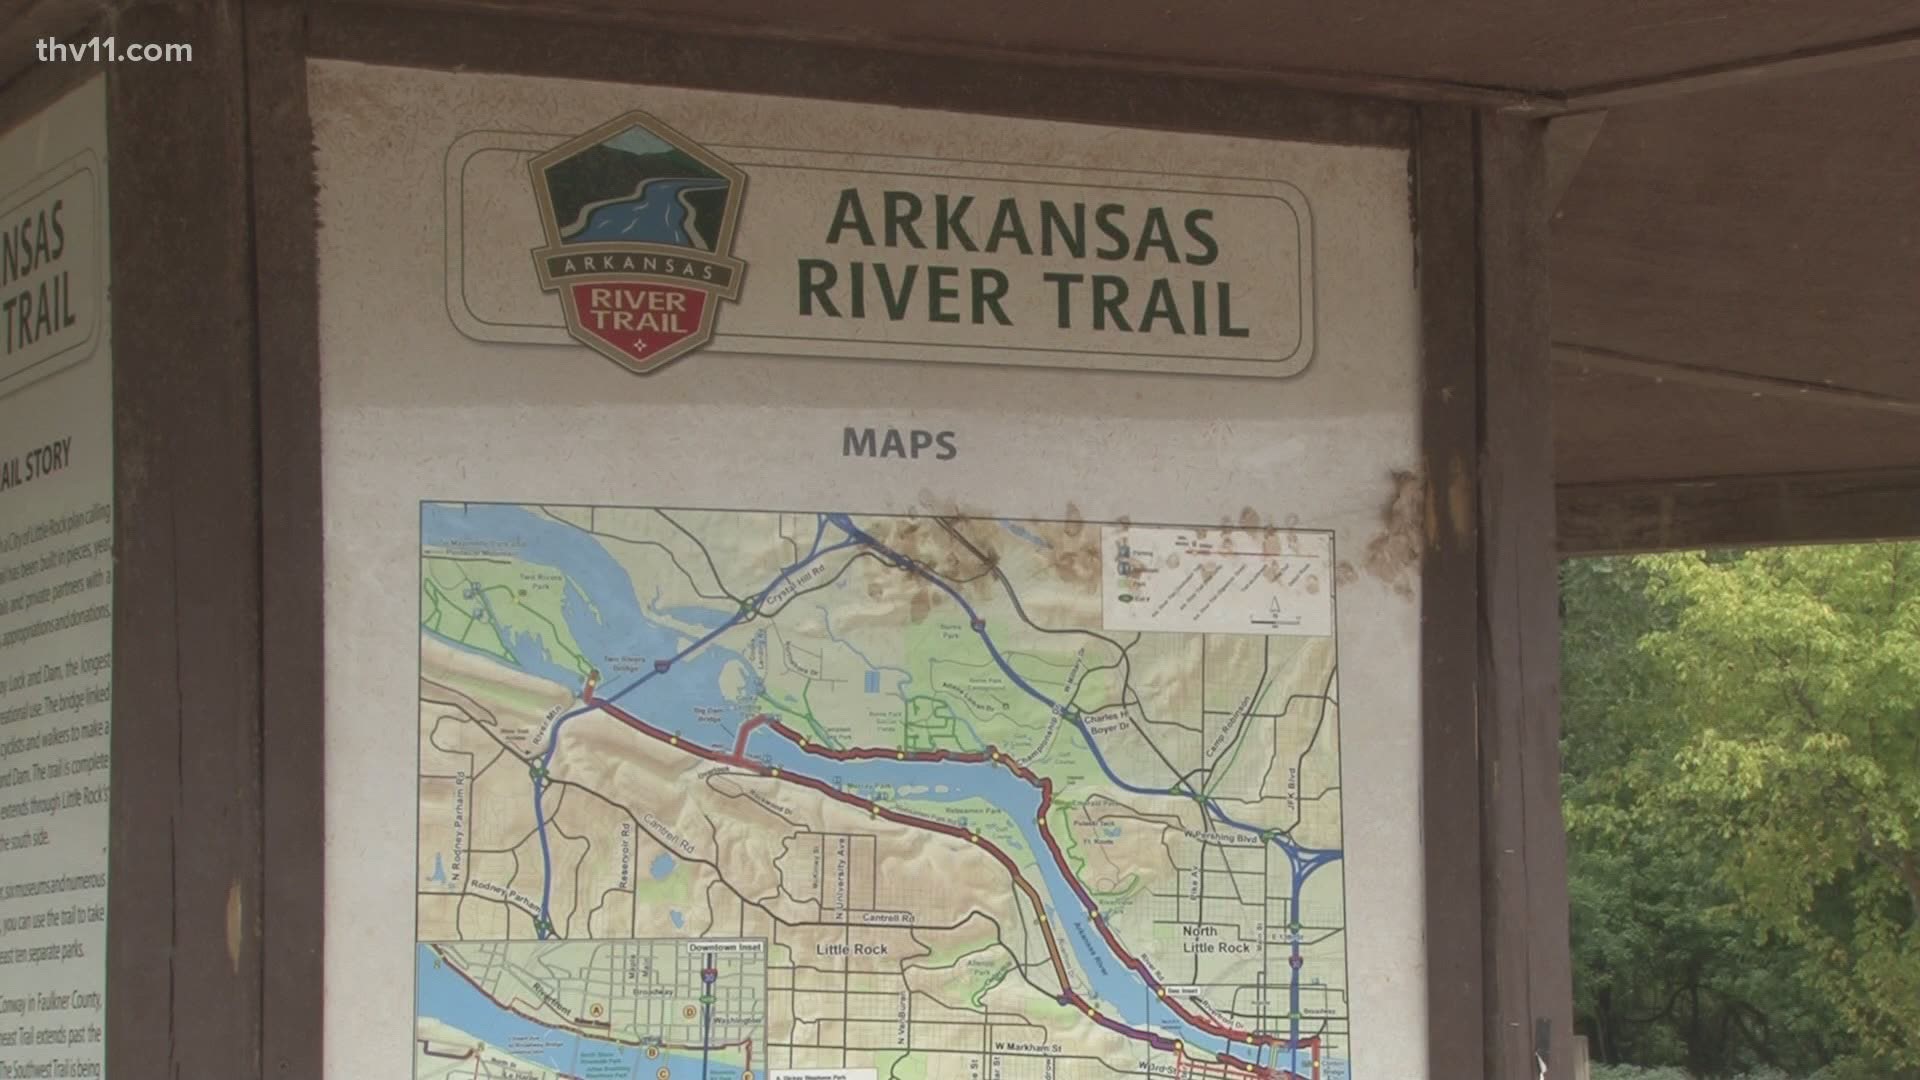 Historic flooding in 2019 along the Arkansas River is still having effects in 2020.